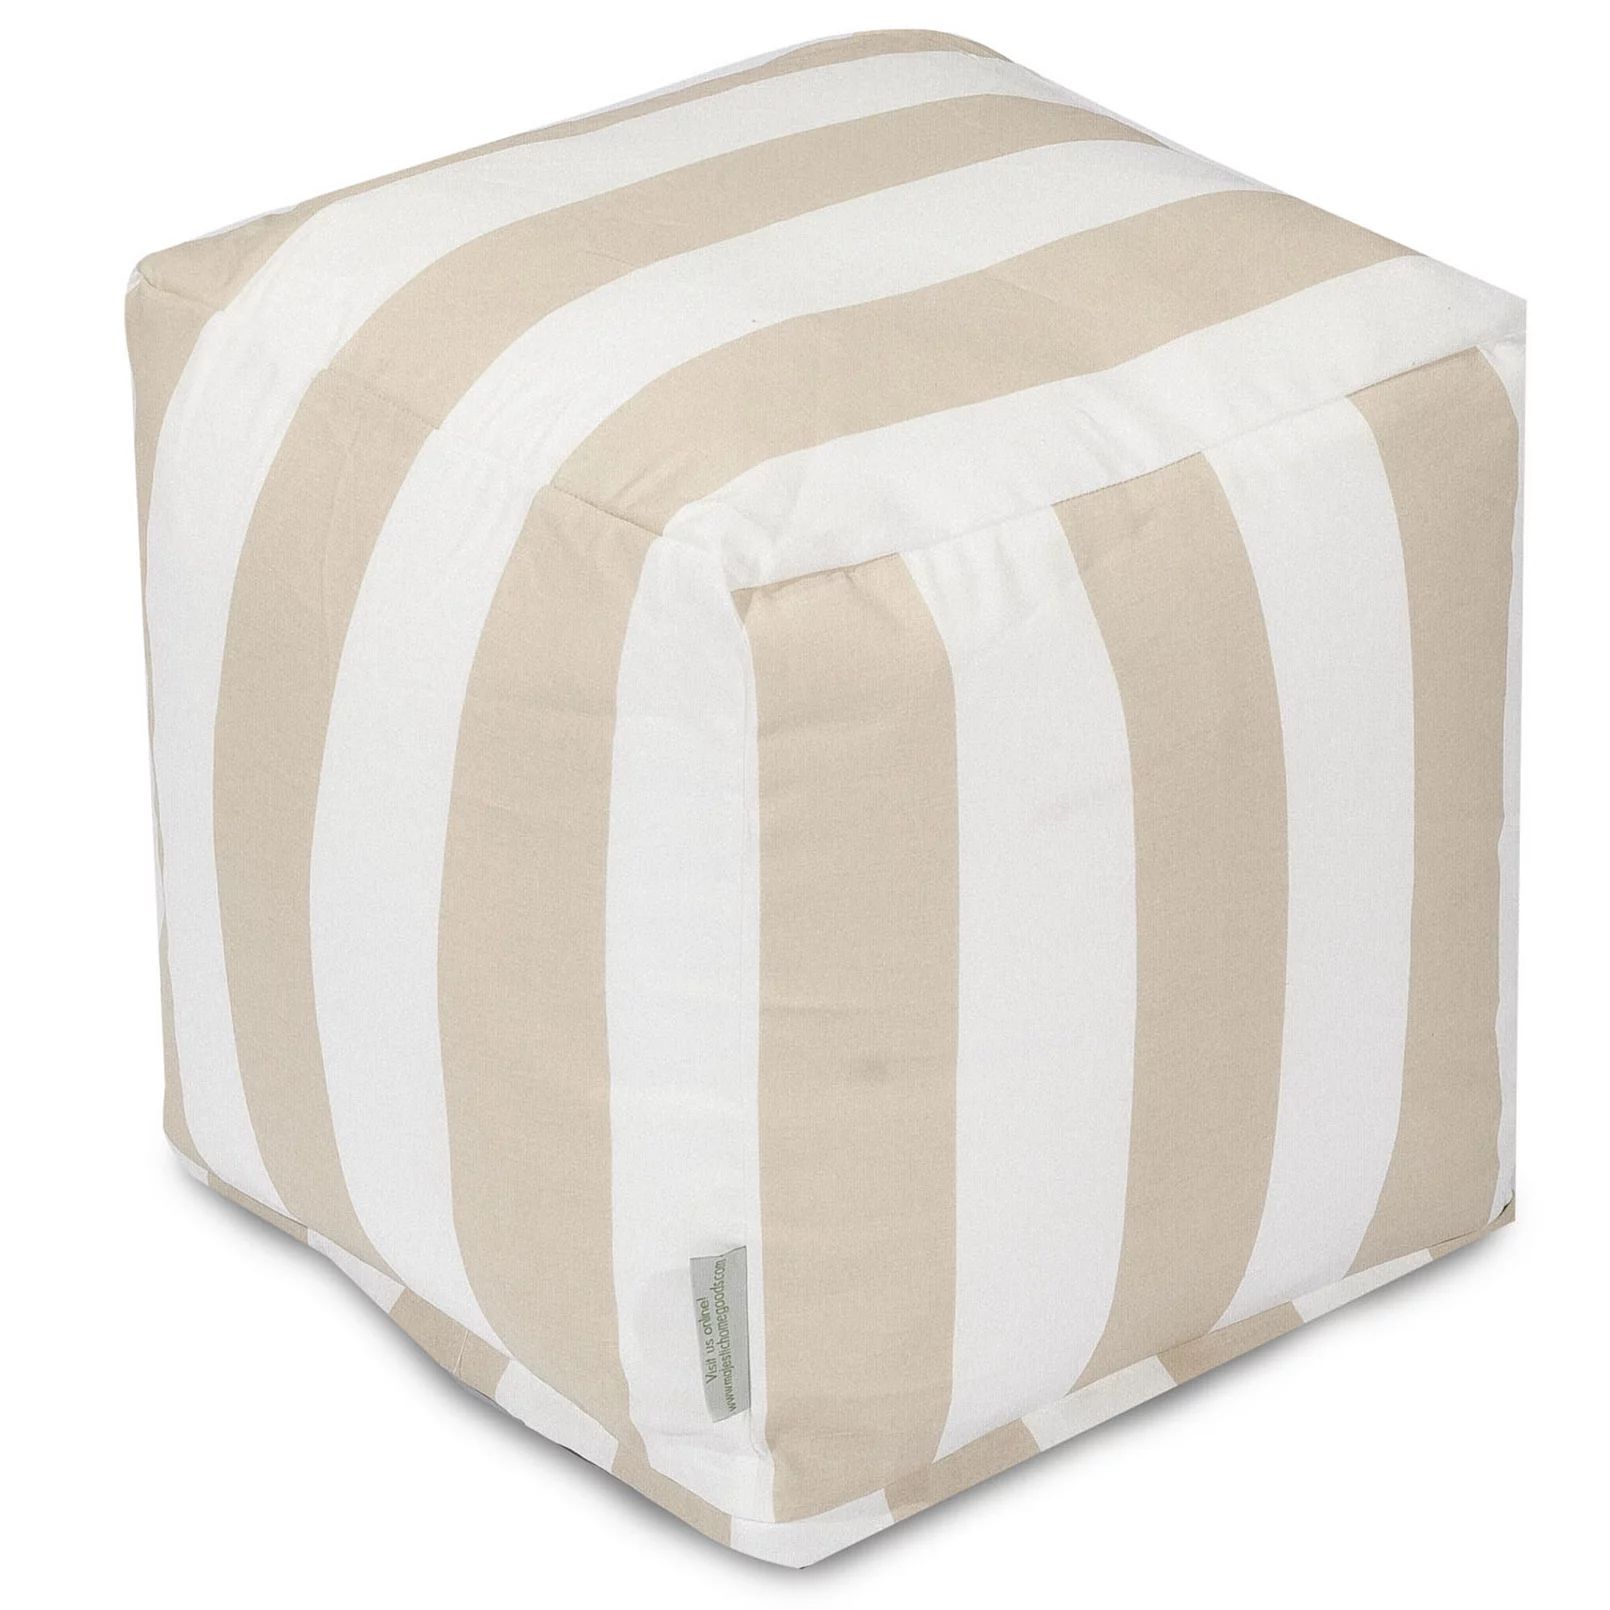 Majestic Home Goods Striped Indoor Outdoor Small Cube Ottoman | Kohl's